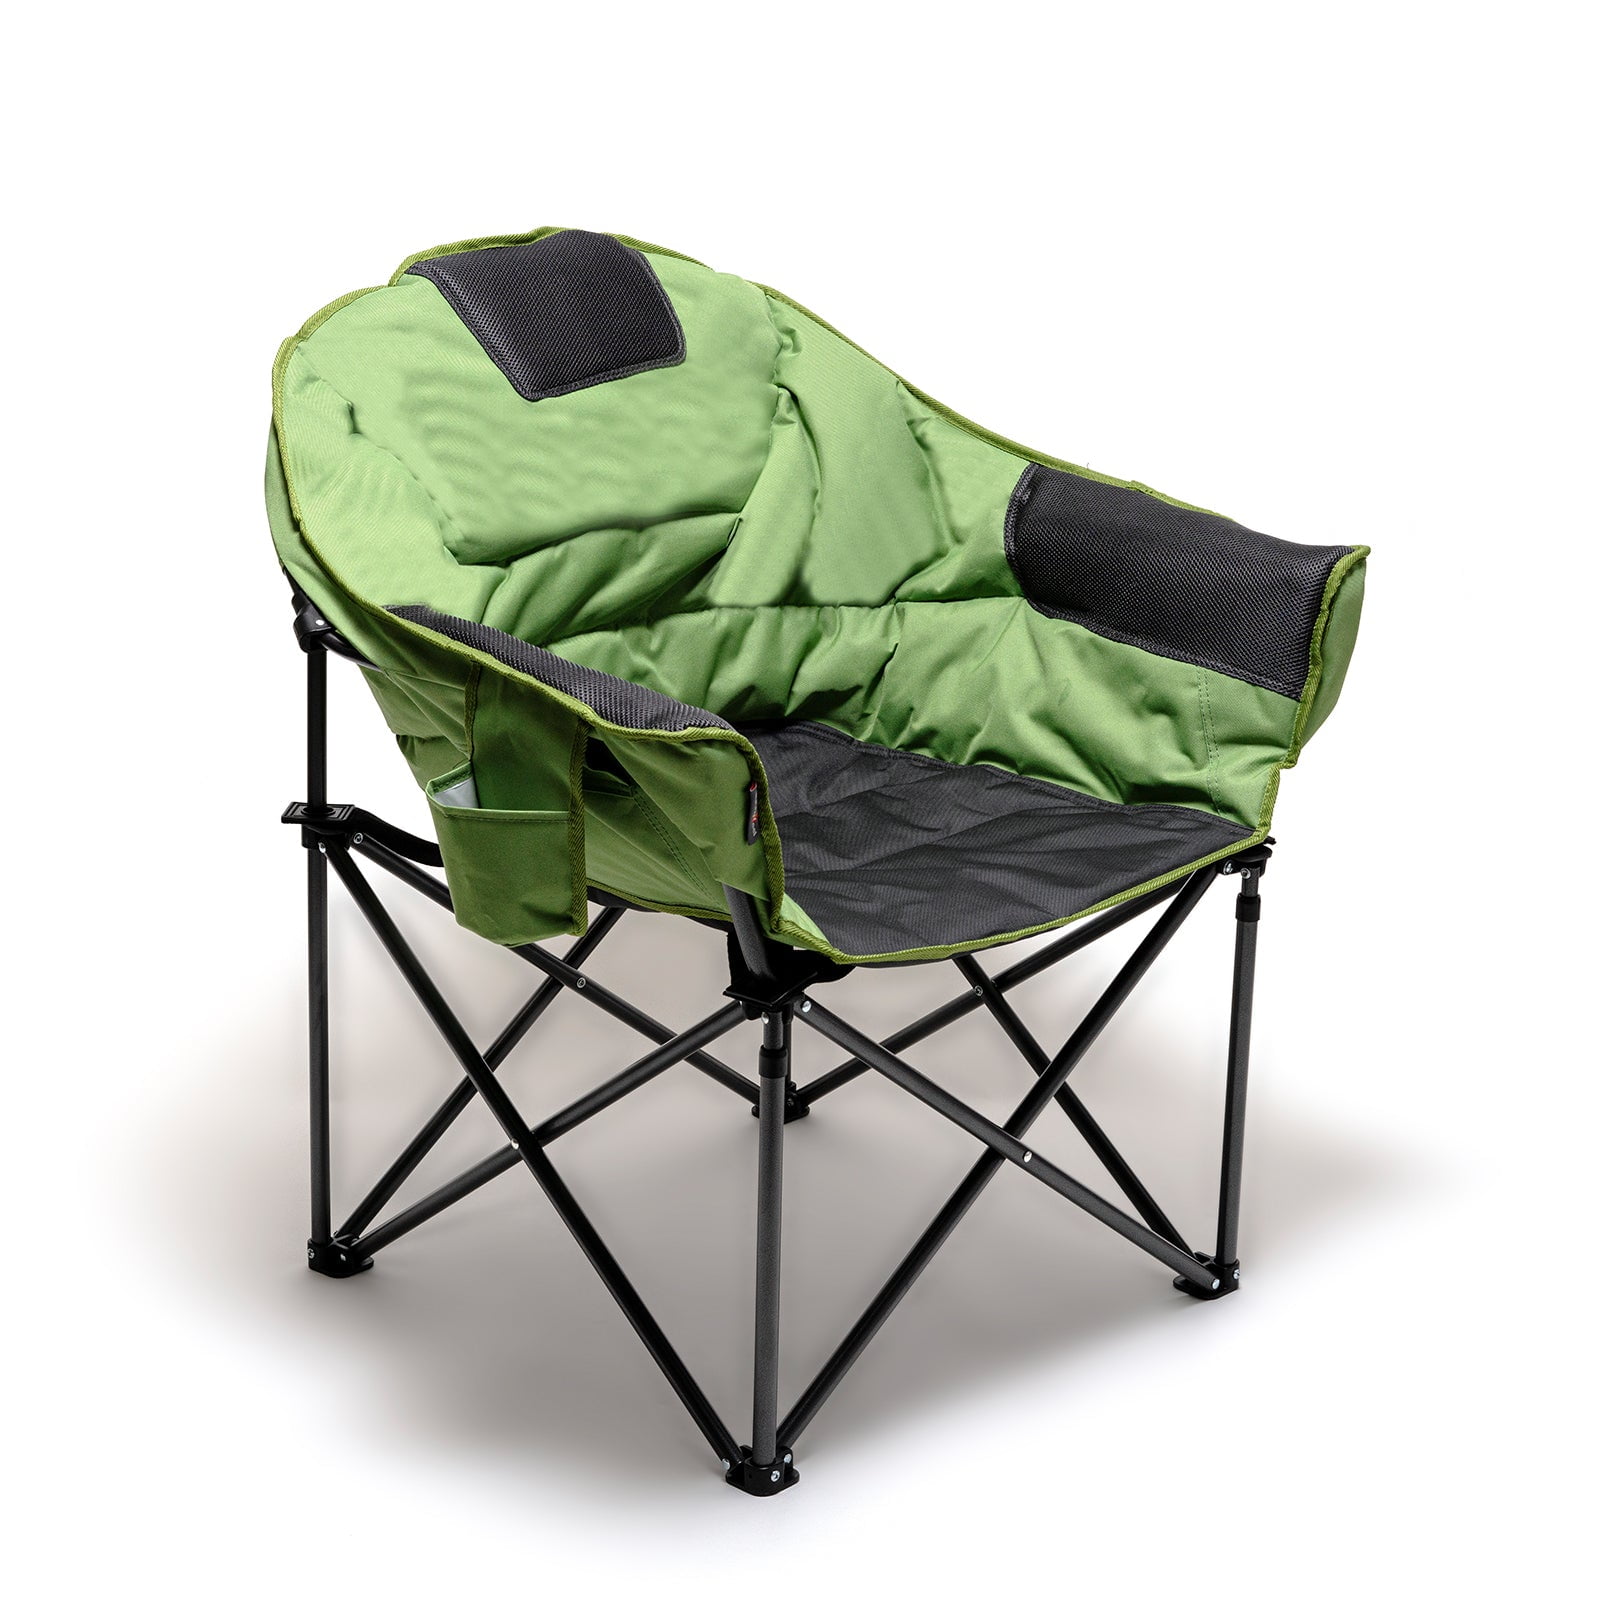 500 lb XXL Oversized Heavy duty folding camping chair portable wide big large 